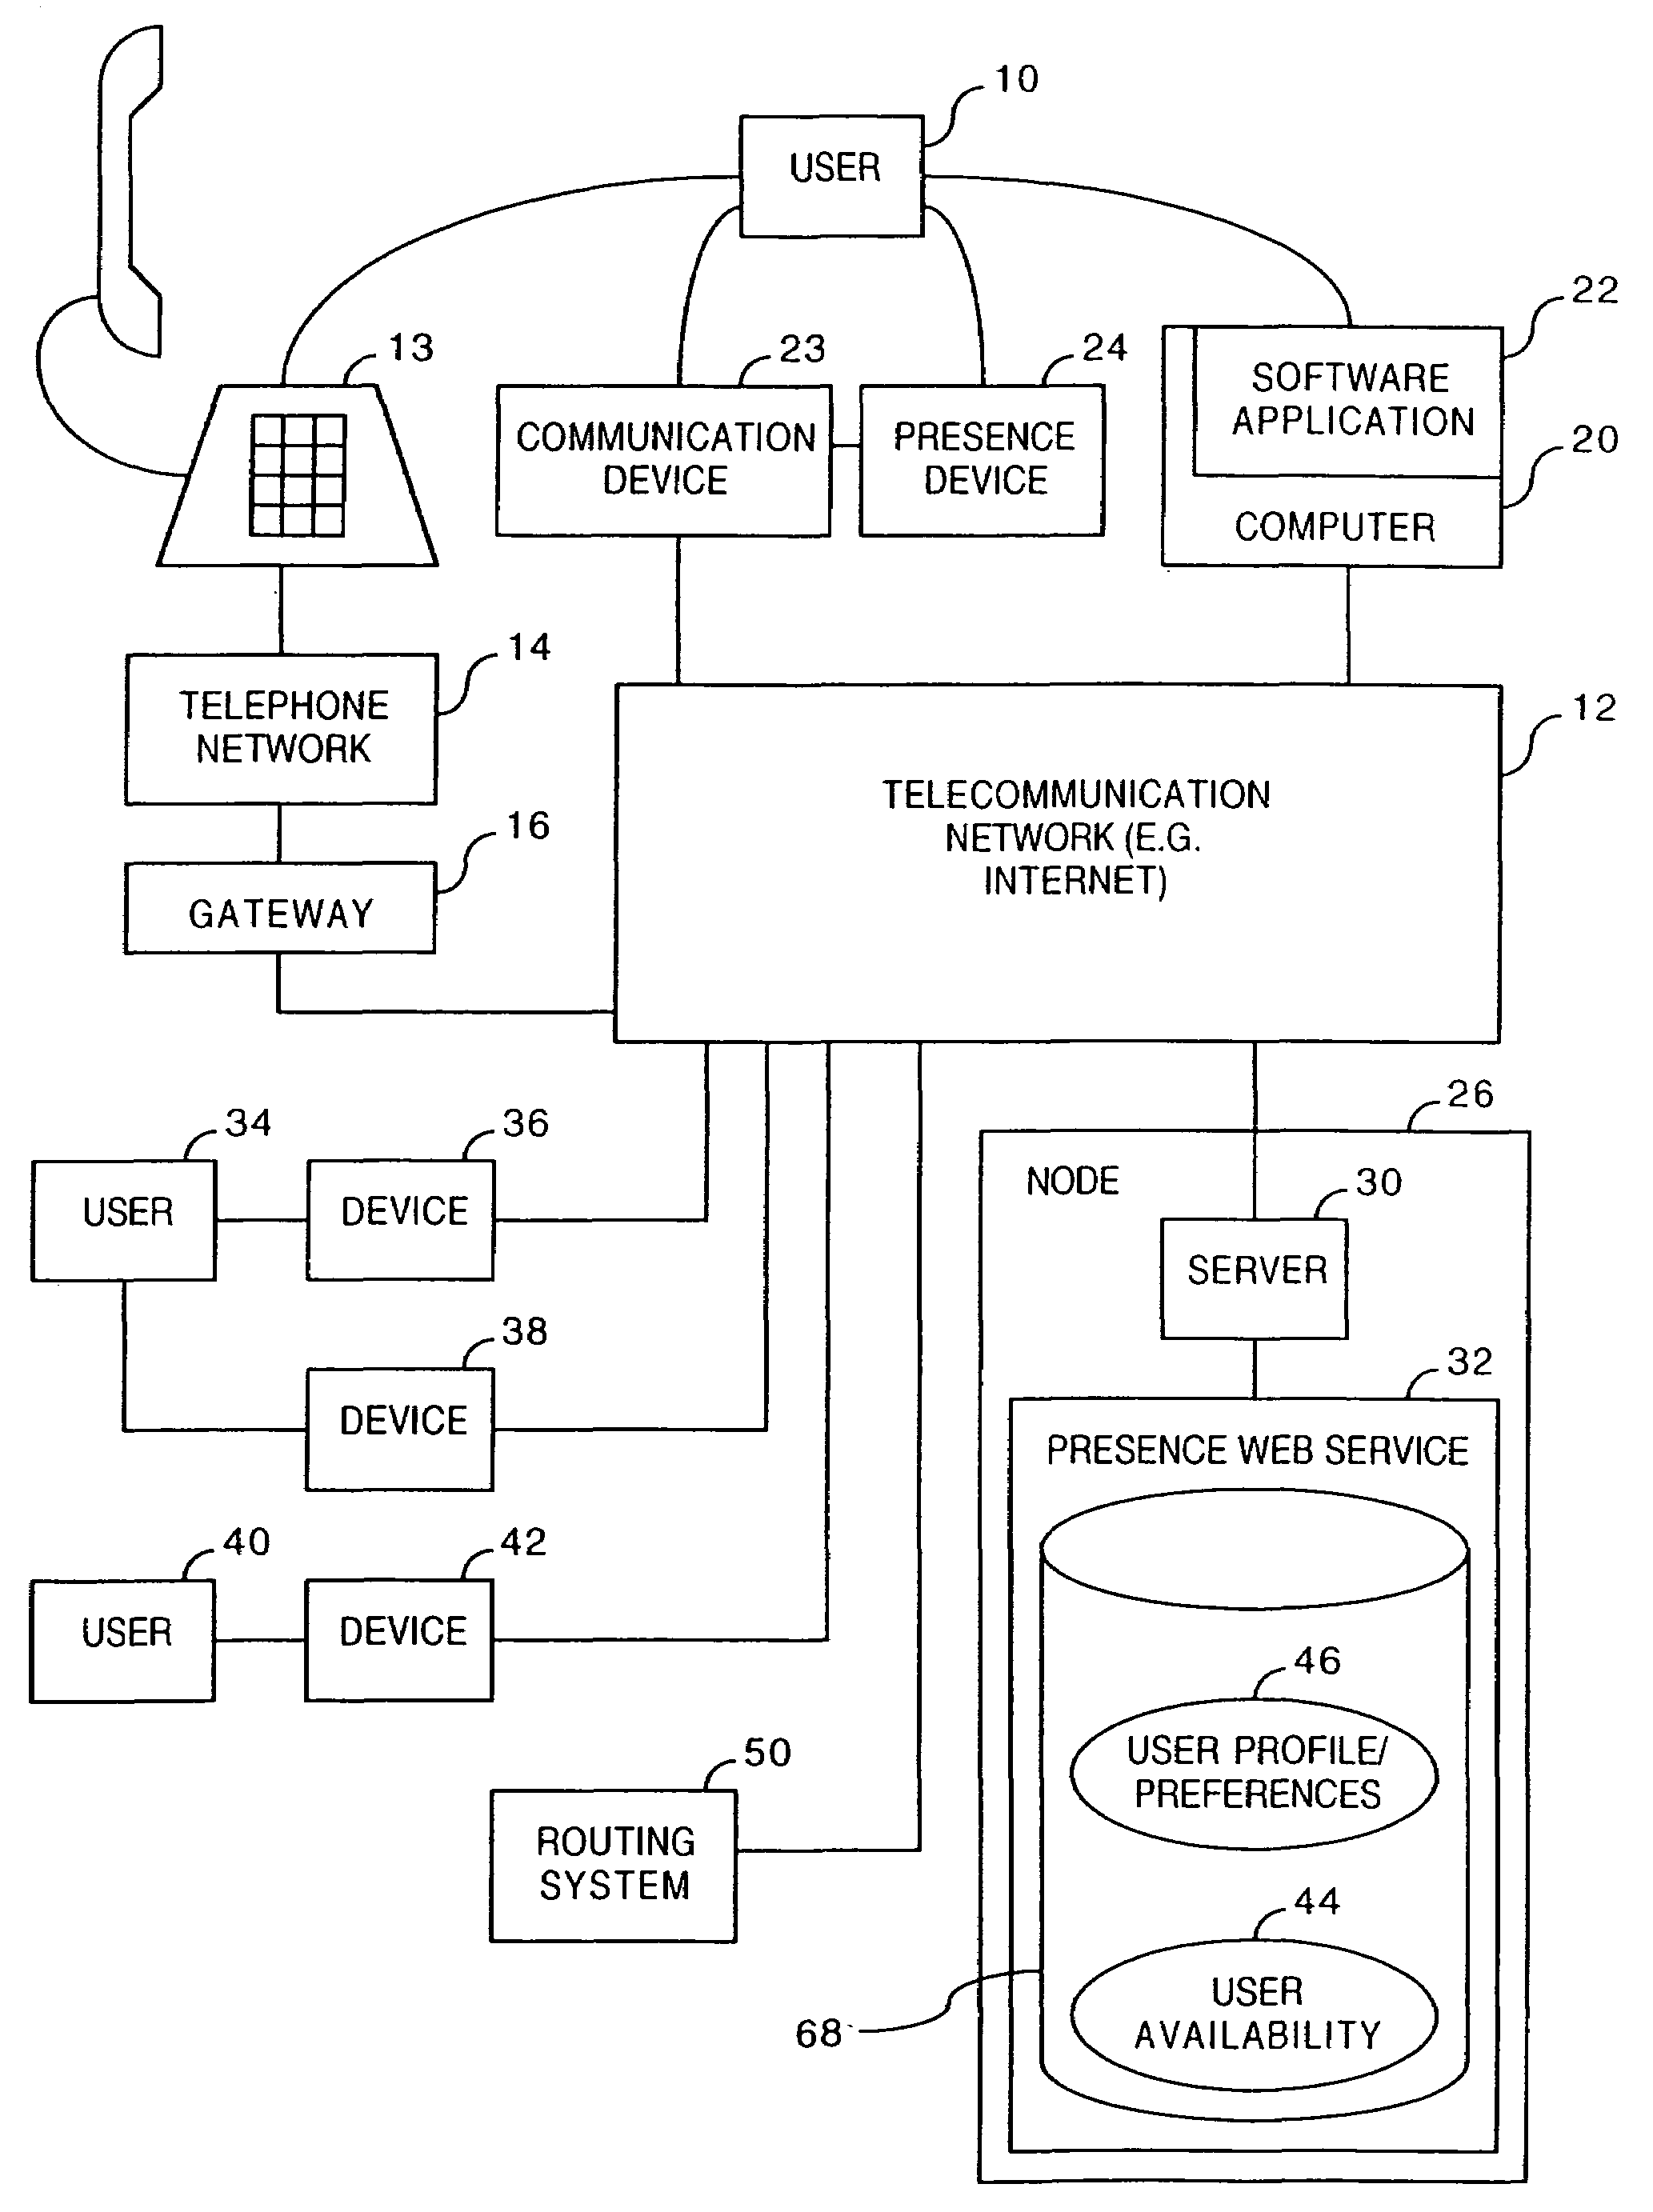 Method and system for multimodal presence detection